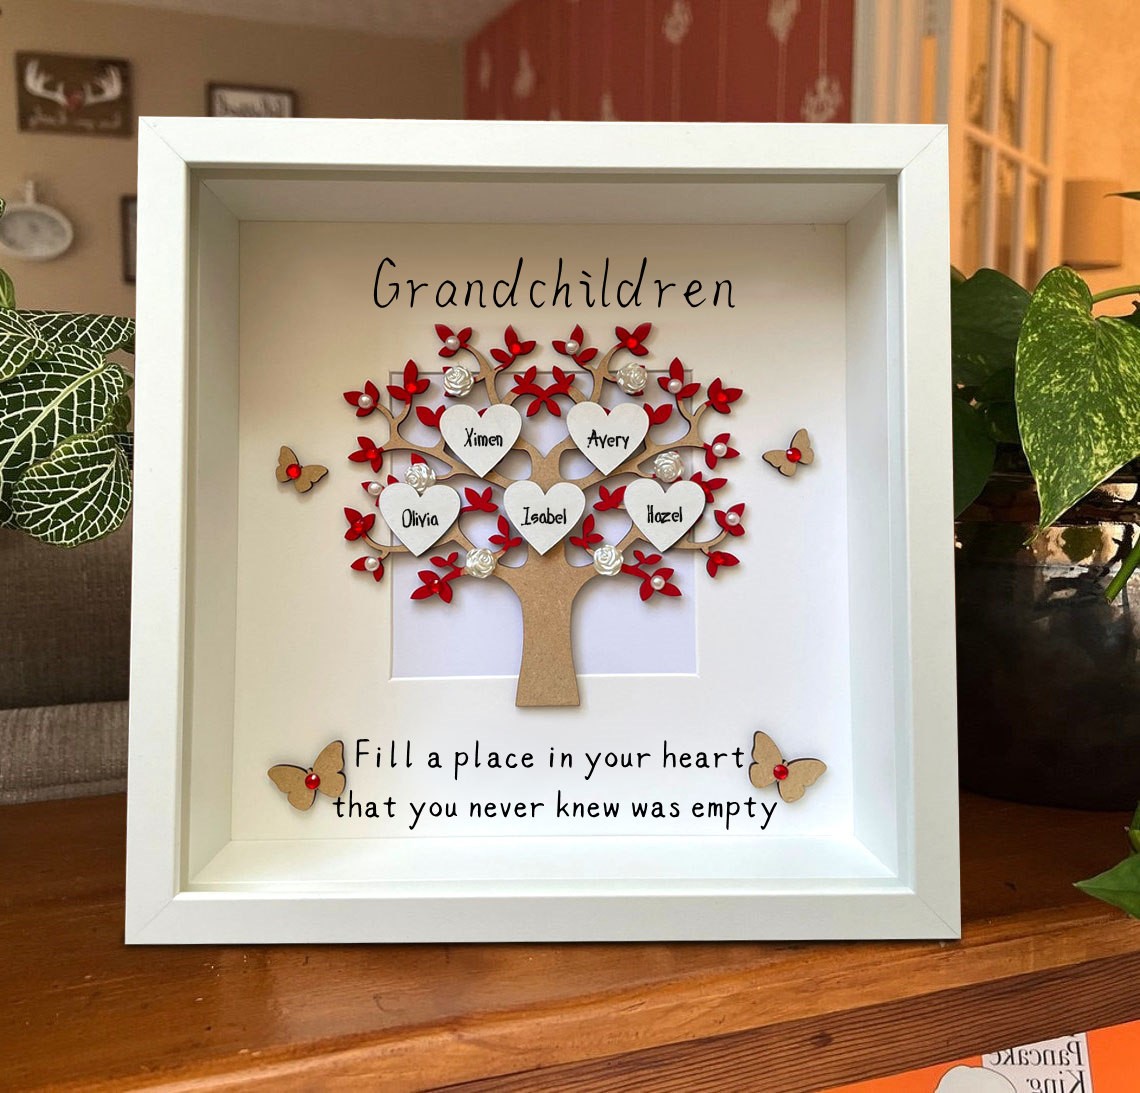 Personalized Family Tree Frame With Grandchildren Name Engraved Home Decor For Mother's Day Christmas